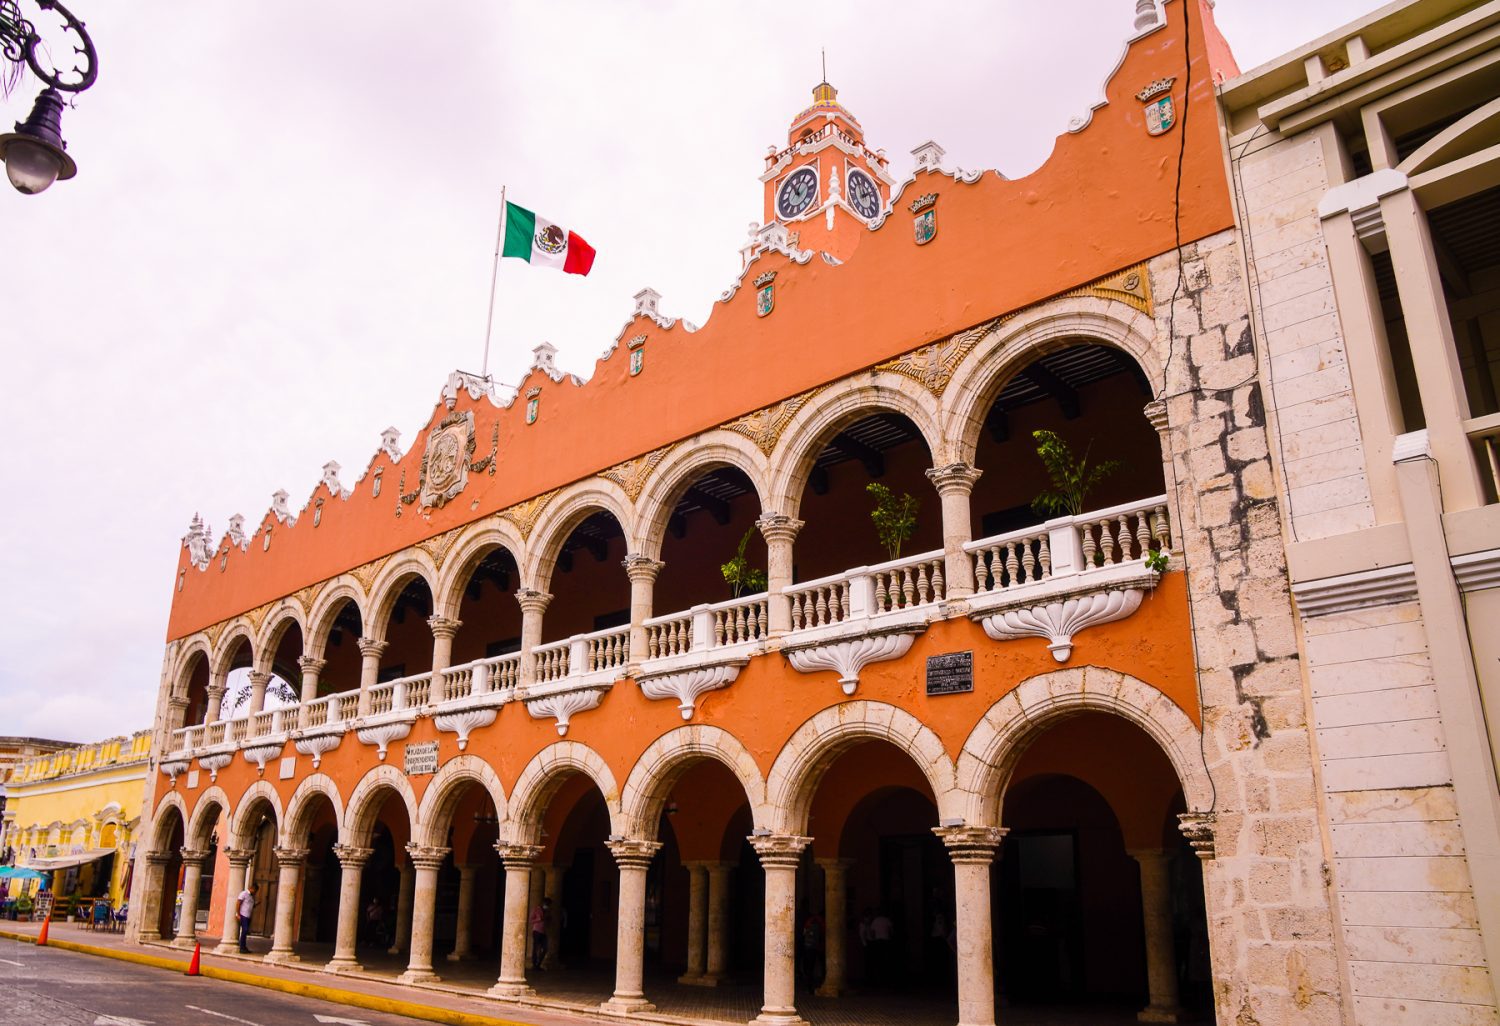 The Municipal Palace in the Plaza Grande.